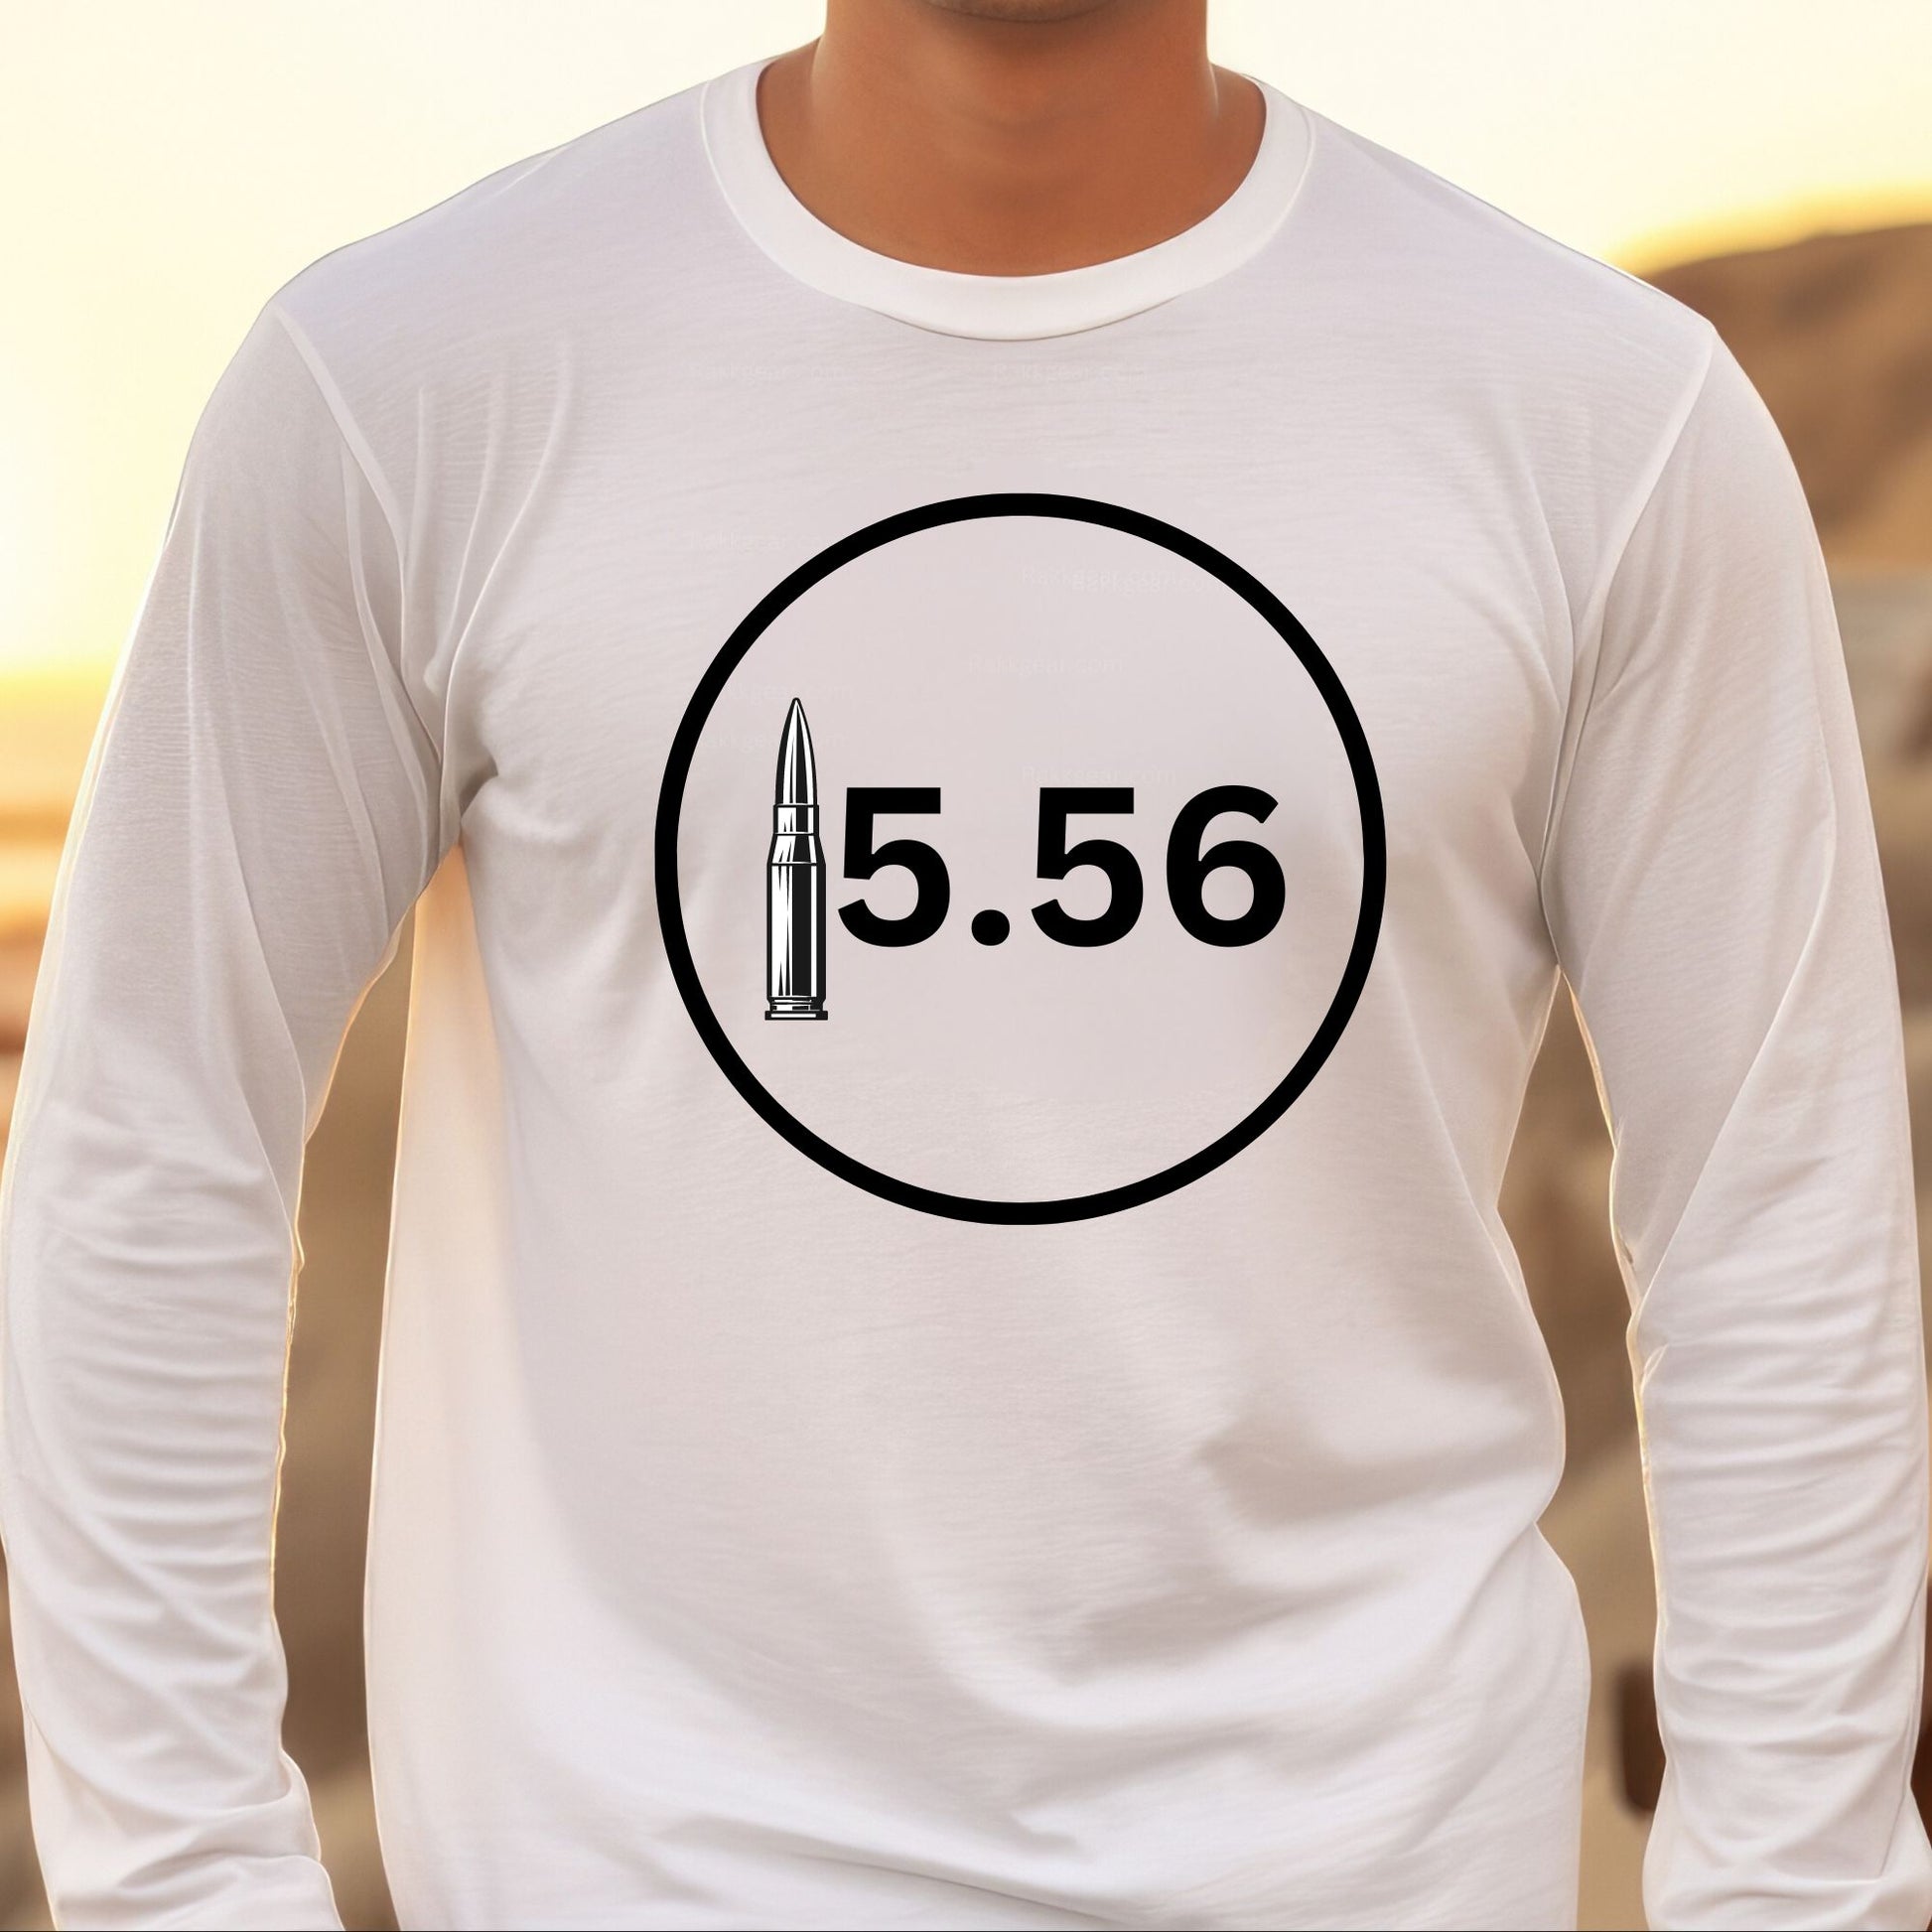 "Patriotic 5.56 White Long Sleeve T-shirt featuring the caliber '5.56' and American flag design."